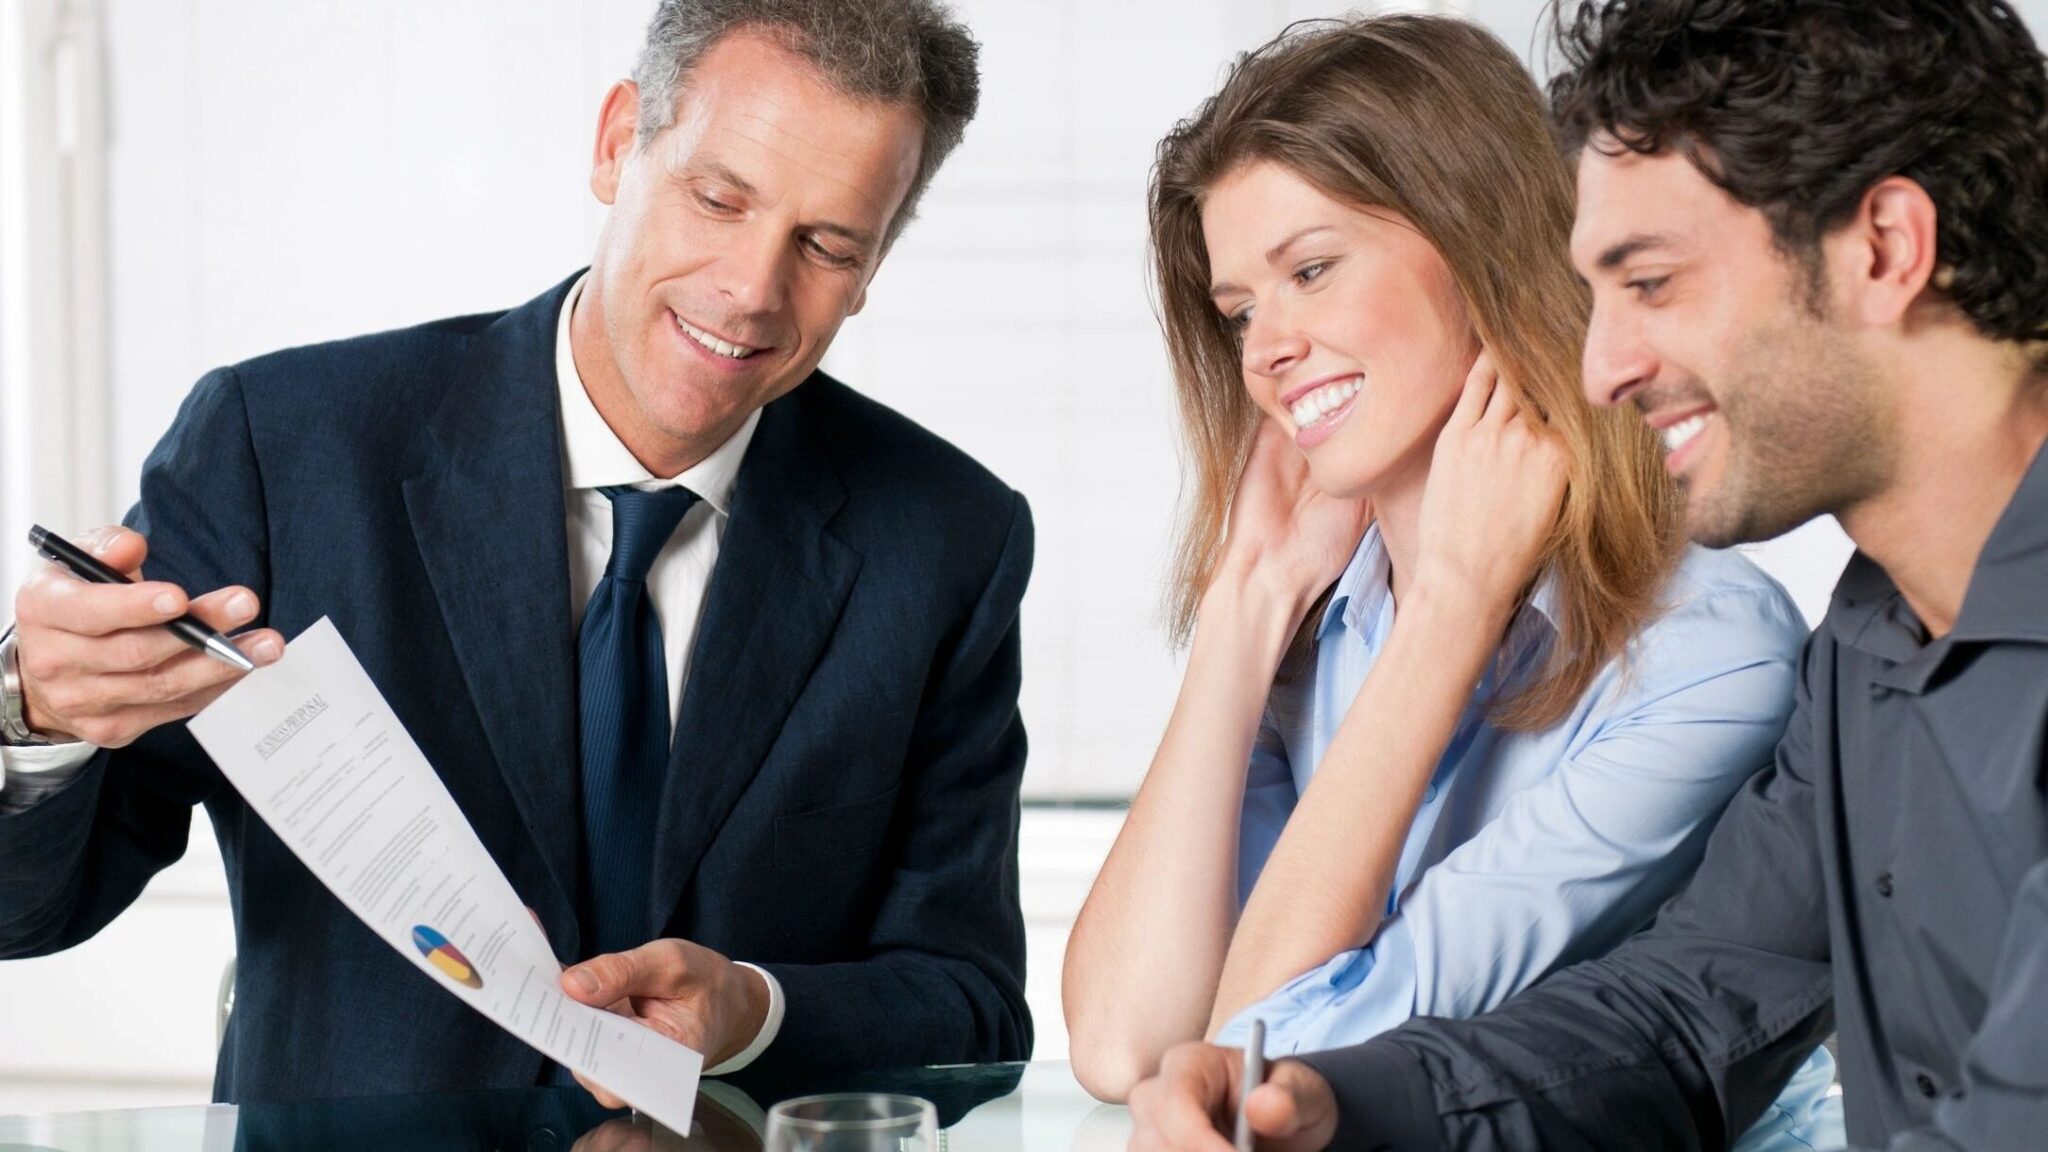 An agent smiles as he shows his two clients paperwork at a table. The clients are also smiling.